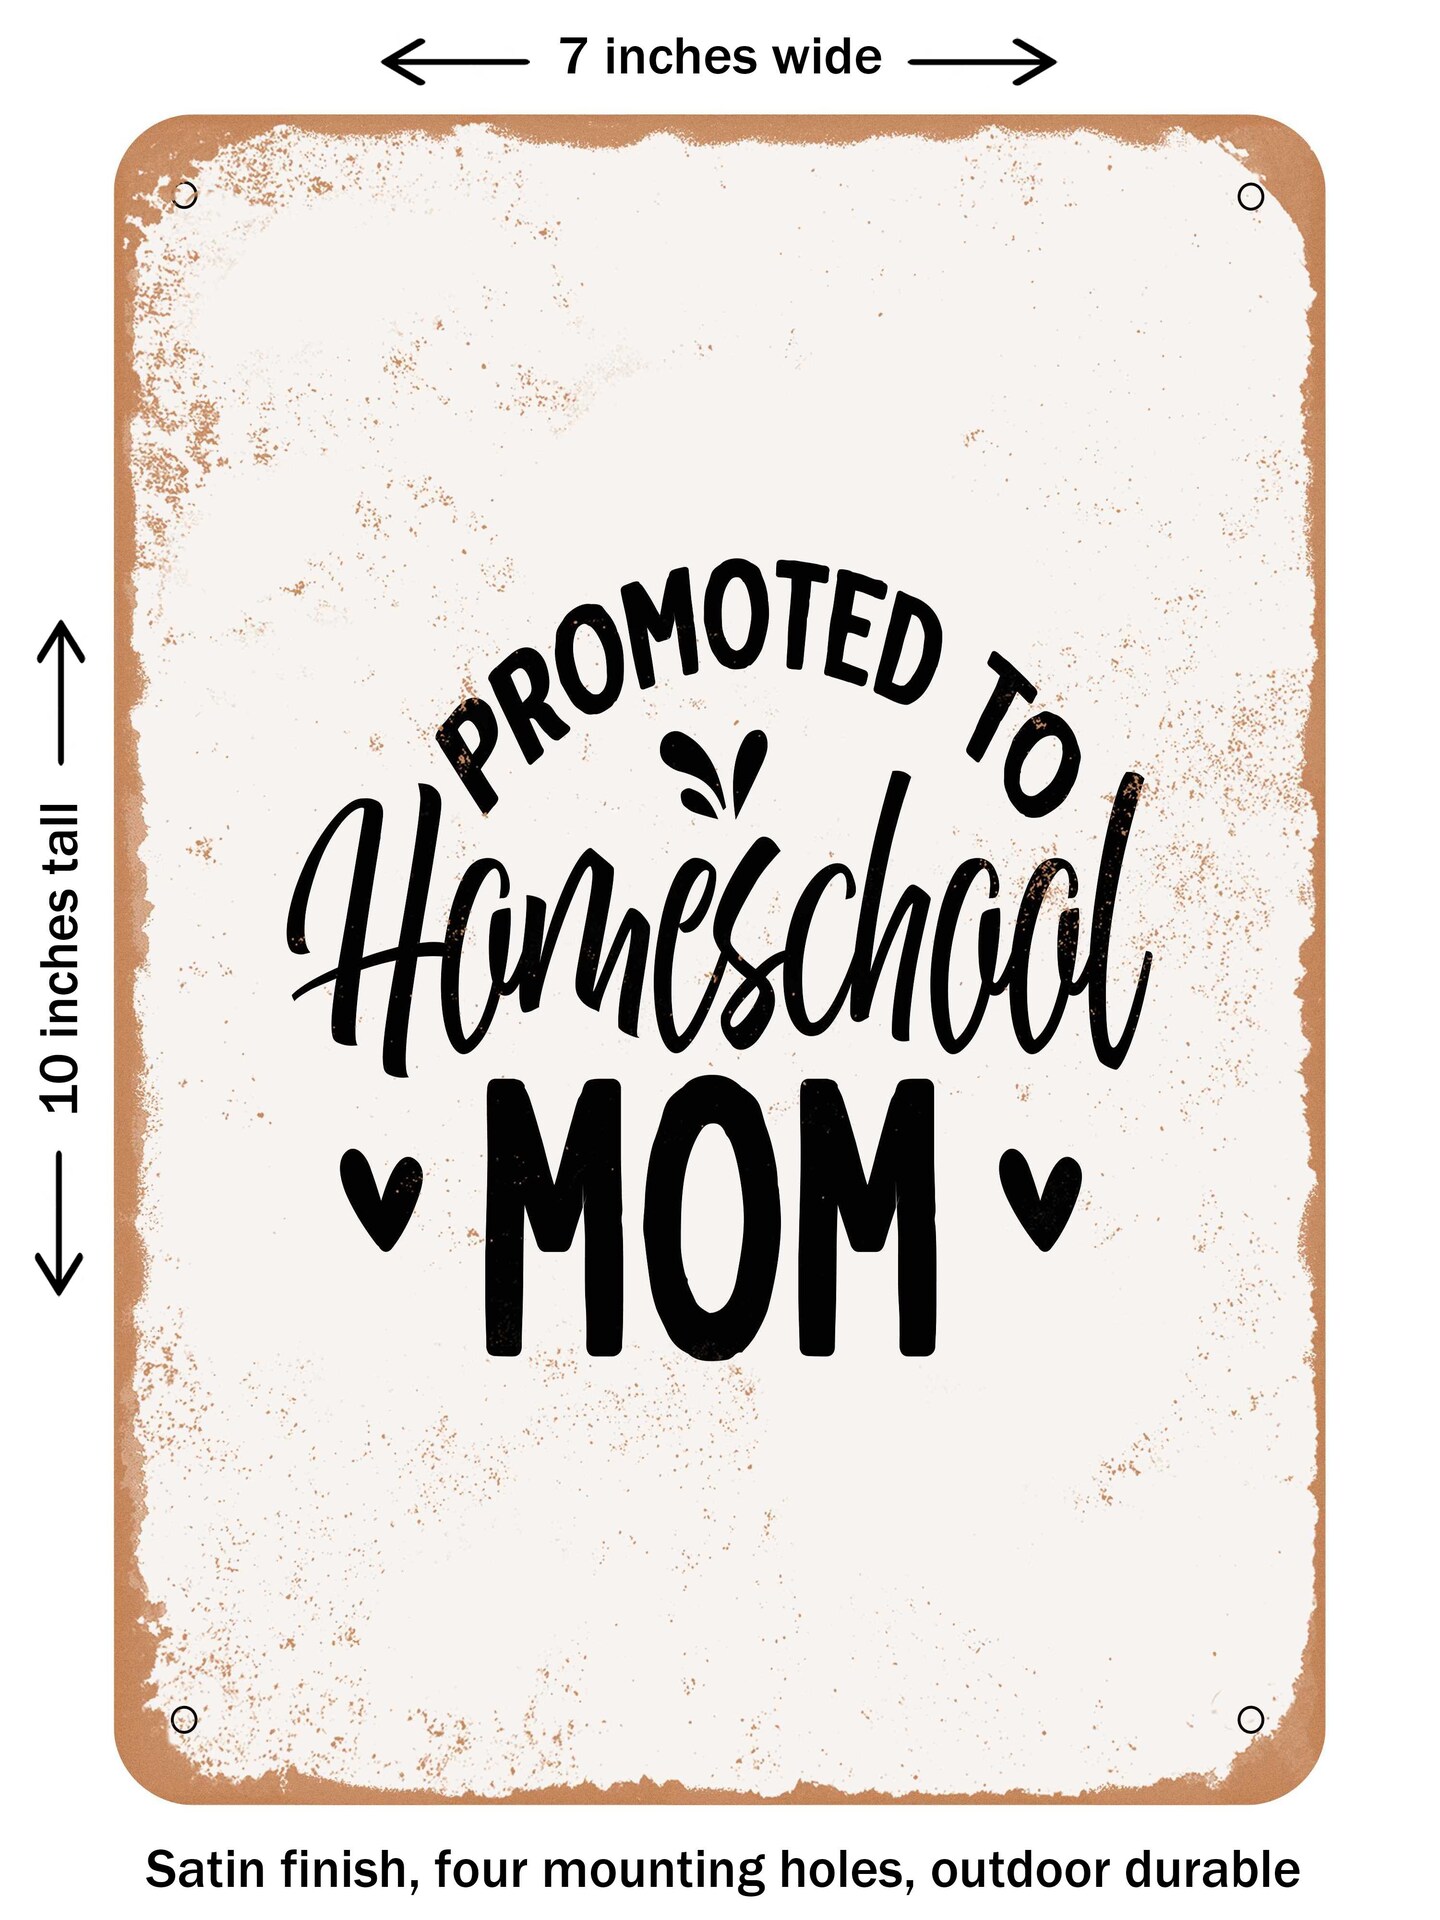 DECORATIVE METAL SIGN - Promoted to Homeschool Mom  - Vintage Rusty Look